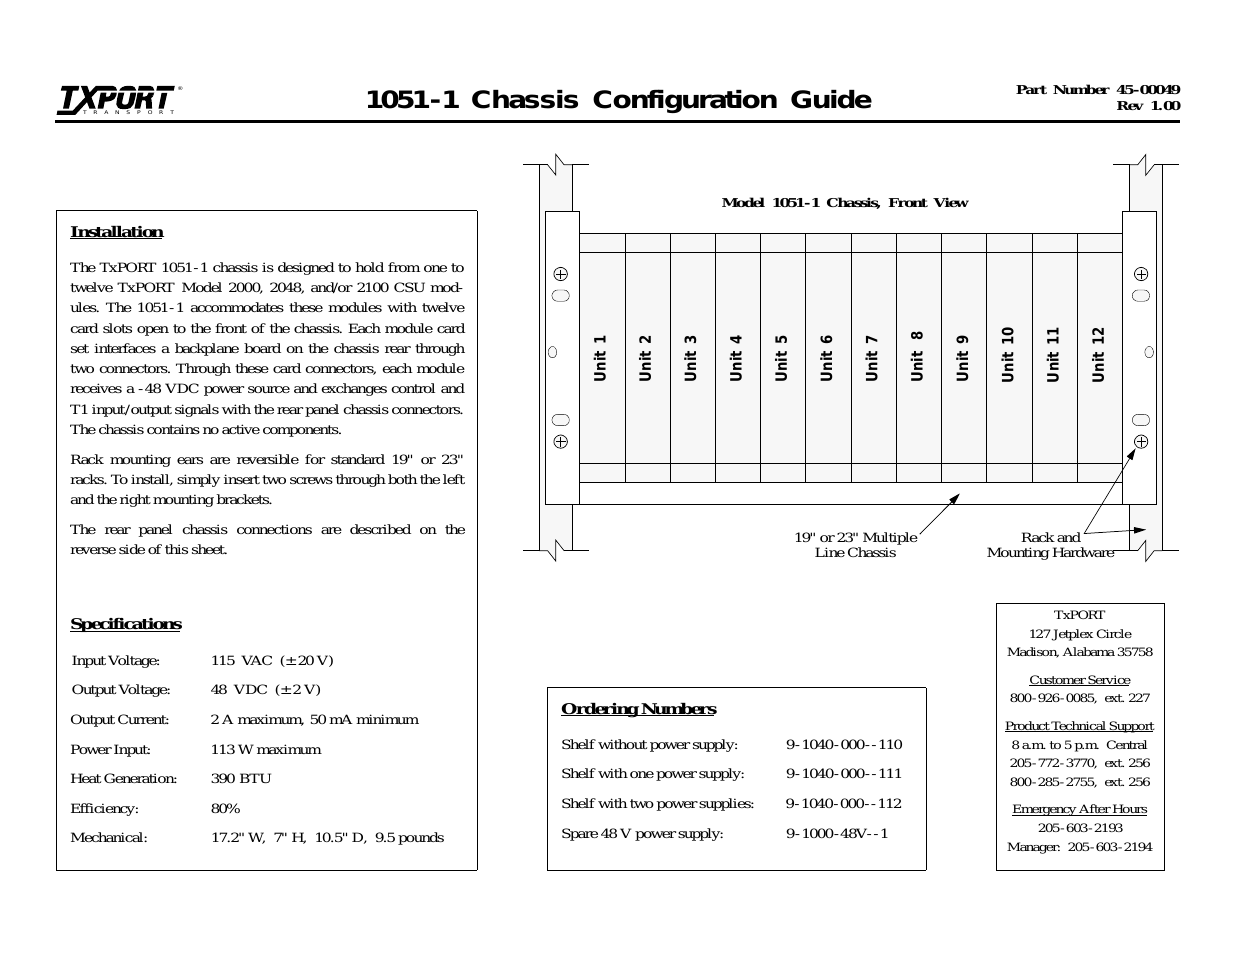 1051-1 Chassis (CG) Configuration/Installation Guide